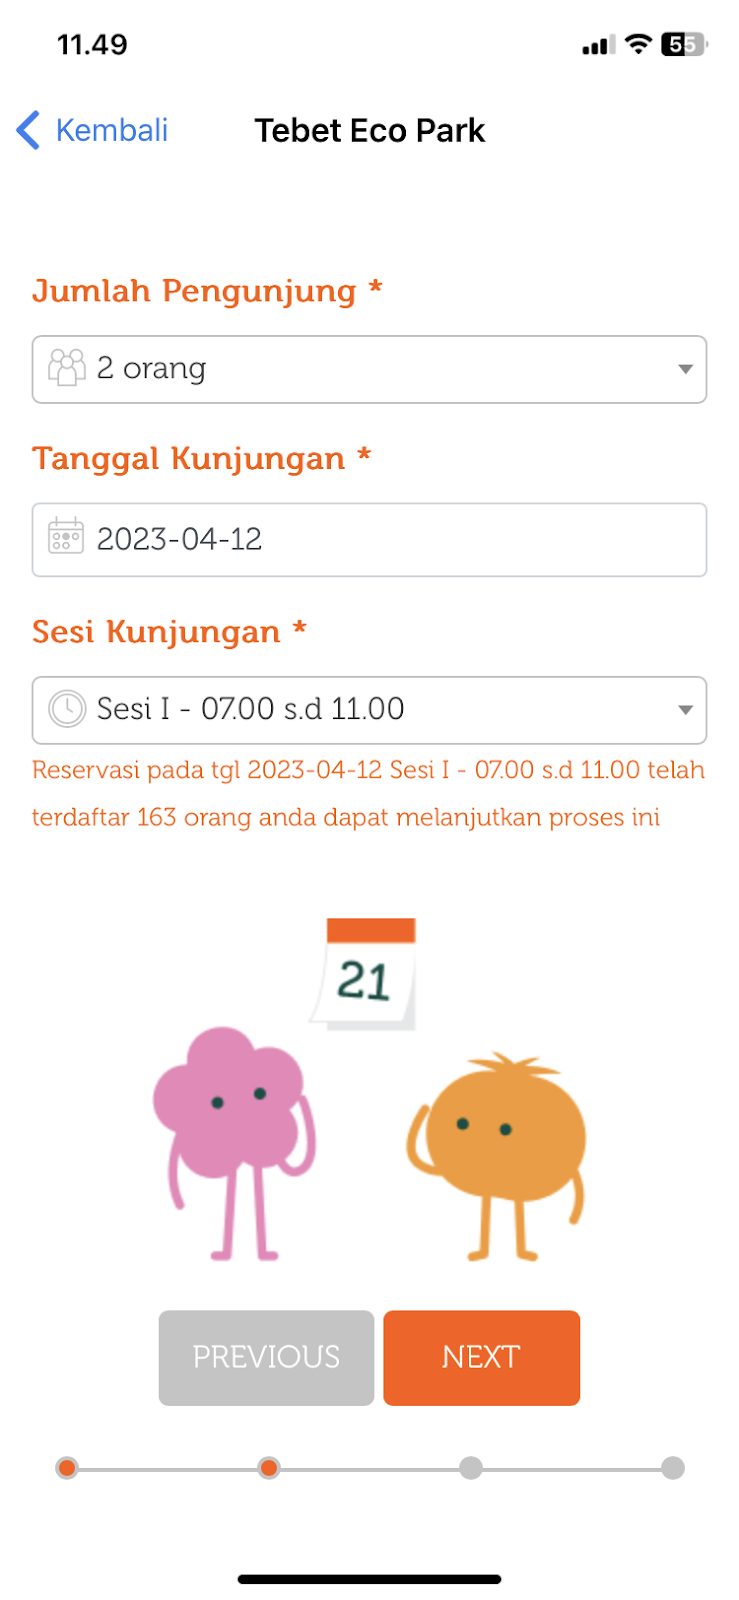 How to get your tickets to Tebet Eco Park